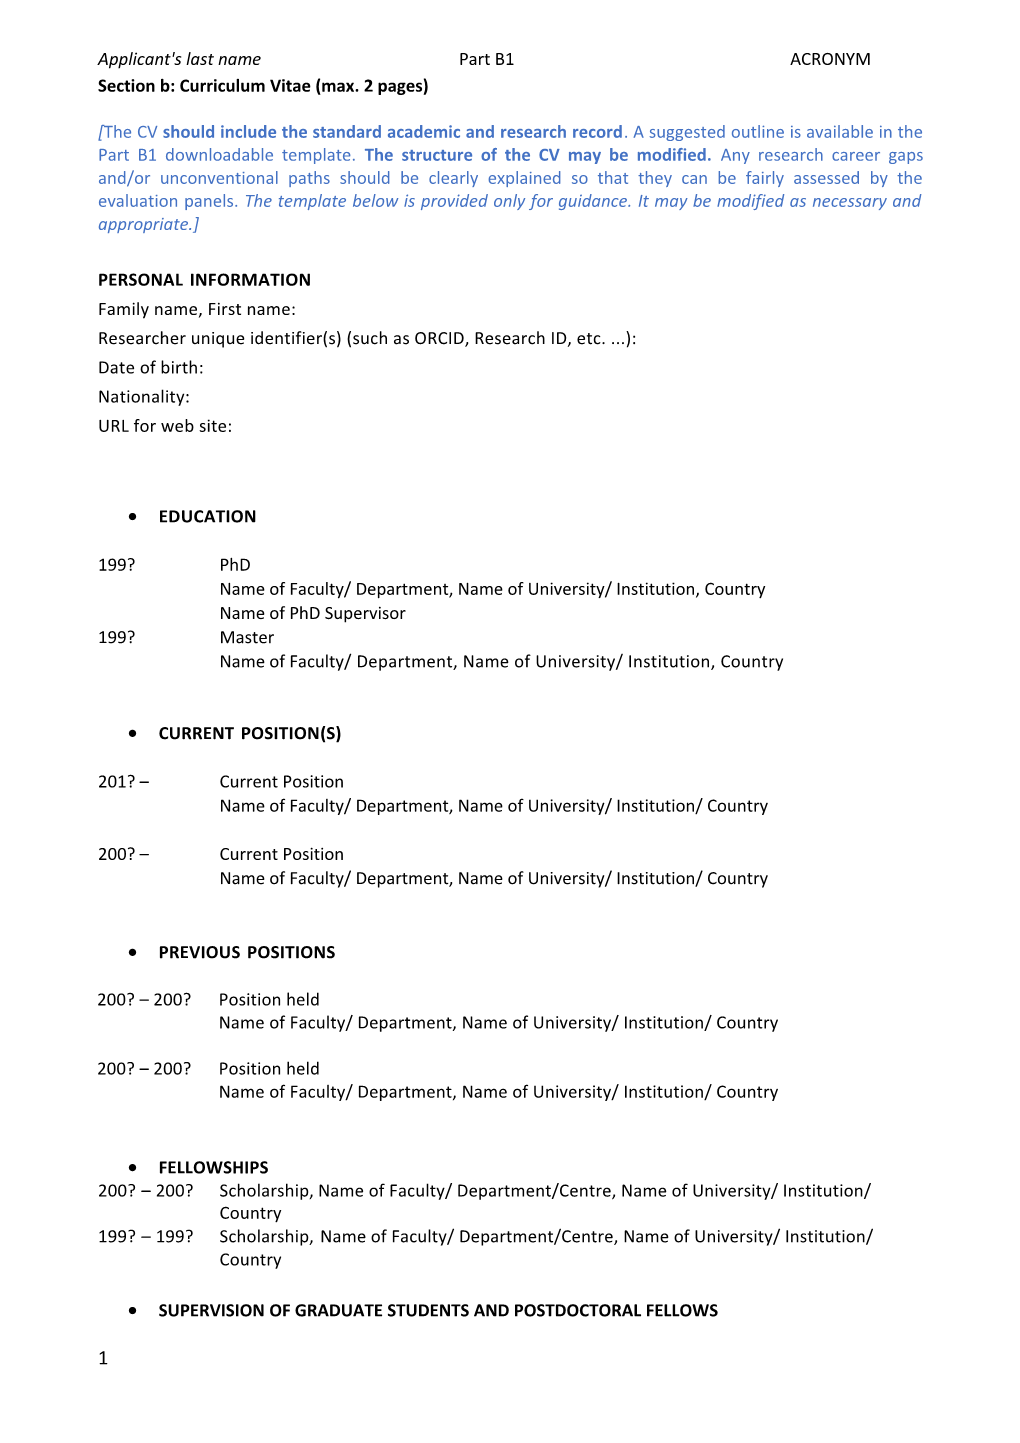 Section B: Curriculum Vitae (Max. 2 Pages)